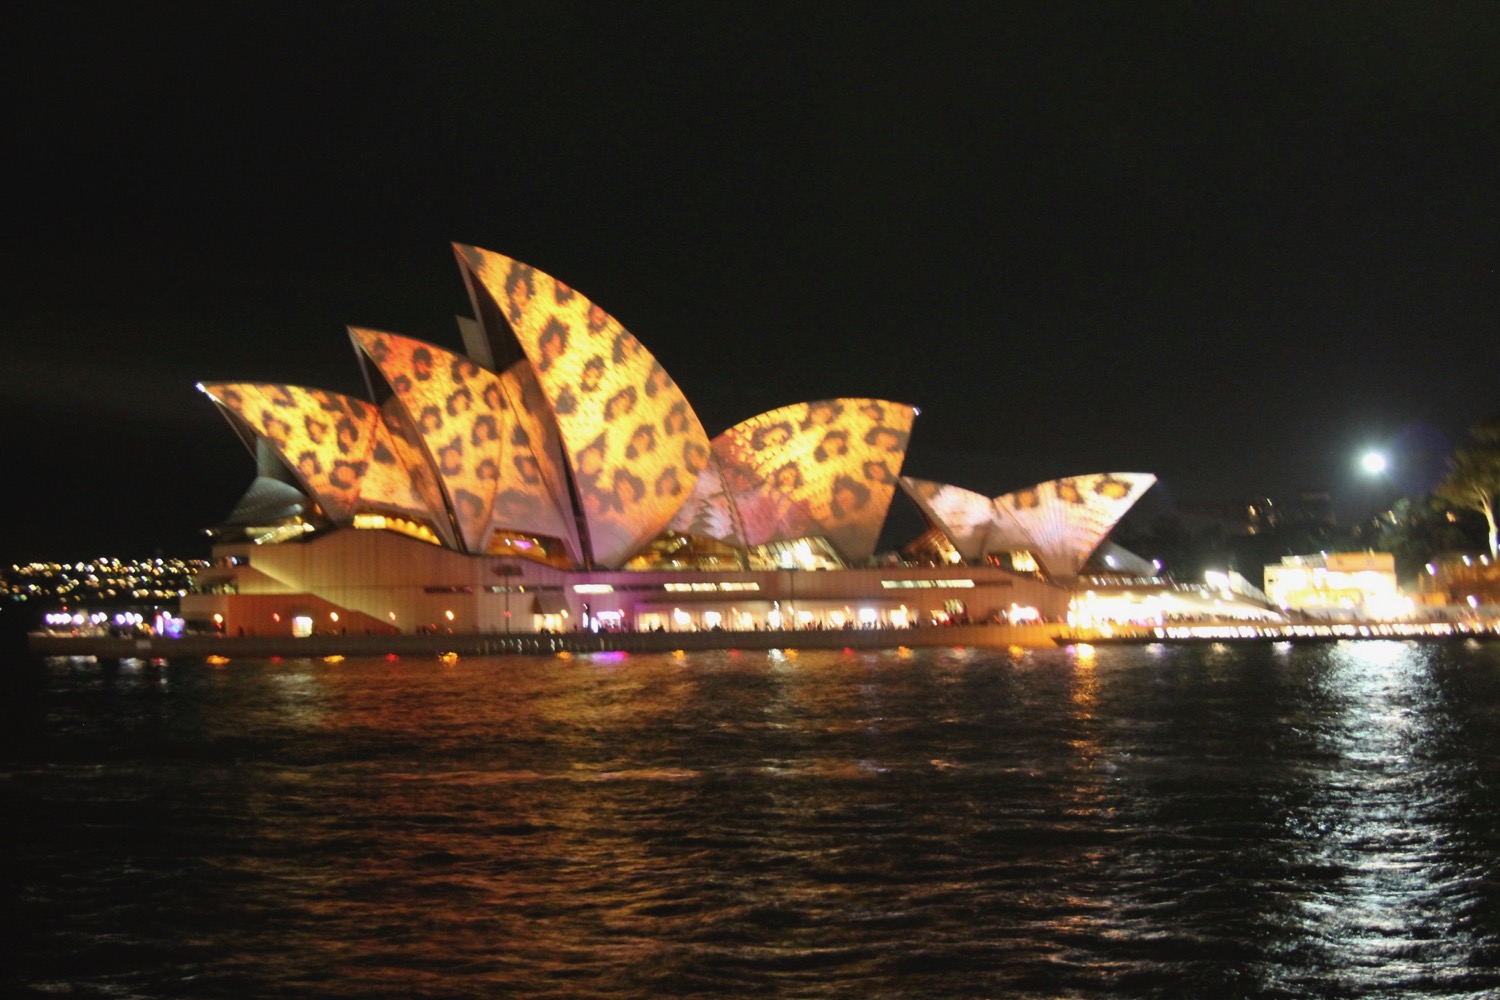 Sydney Opera House with a structure with a large structure with a large structure with a large structure with a large structure with a large structure with a large structure with a large structure with a large structure with a